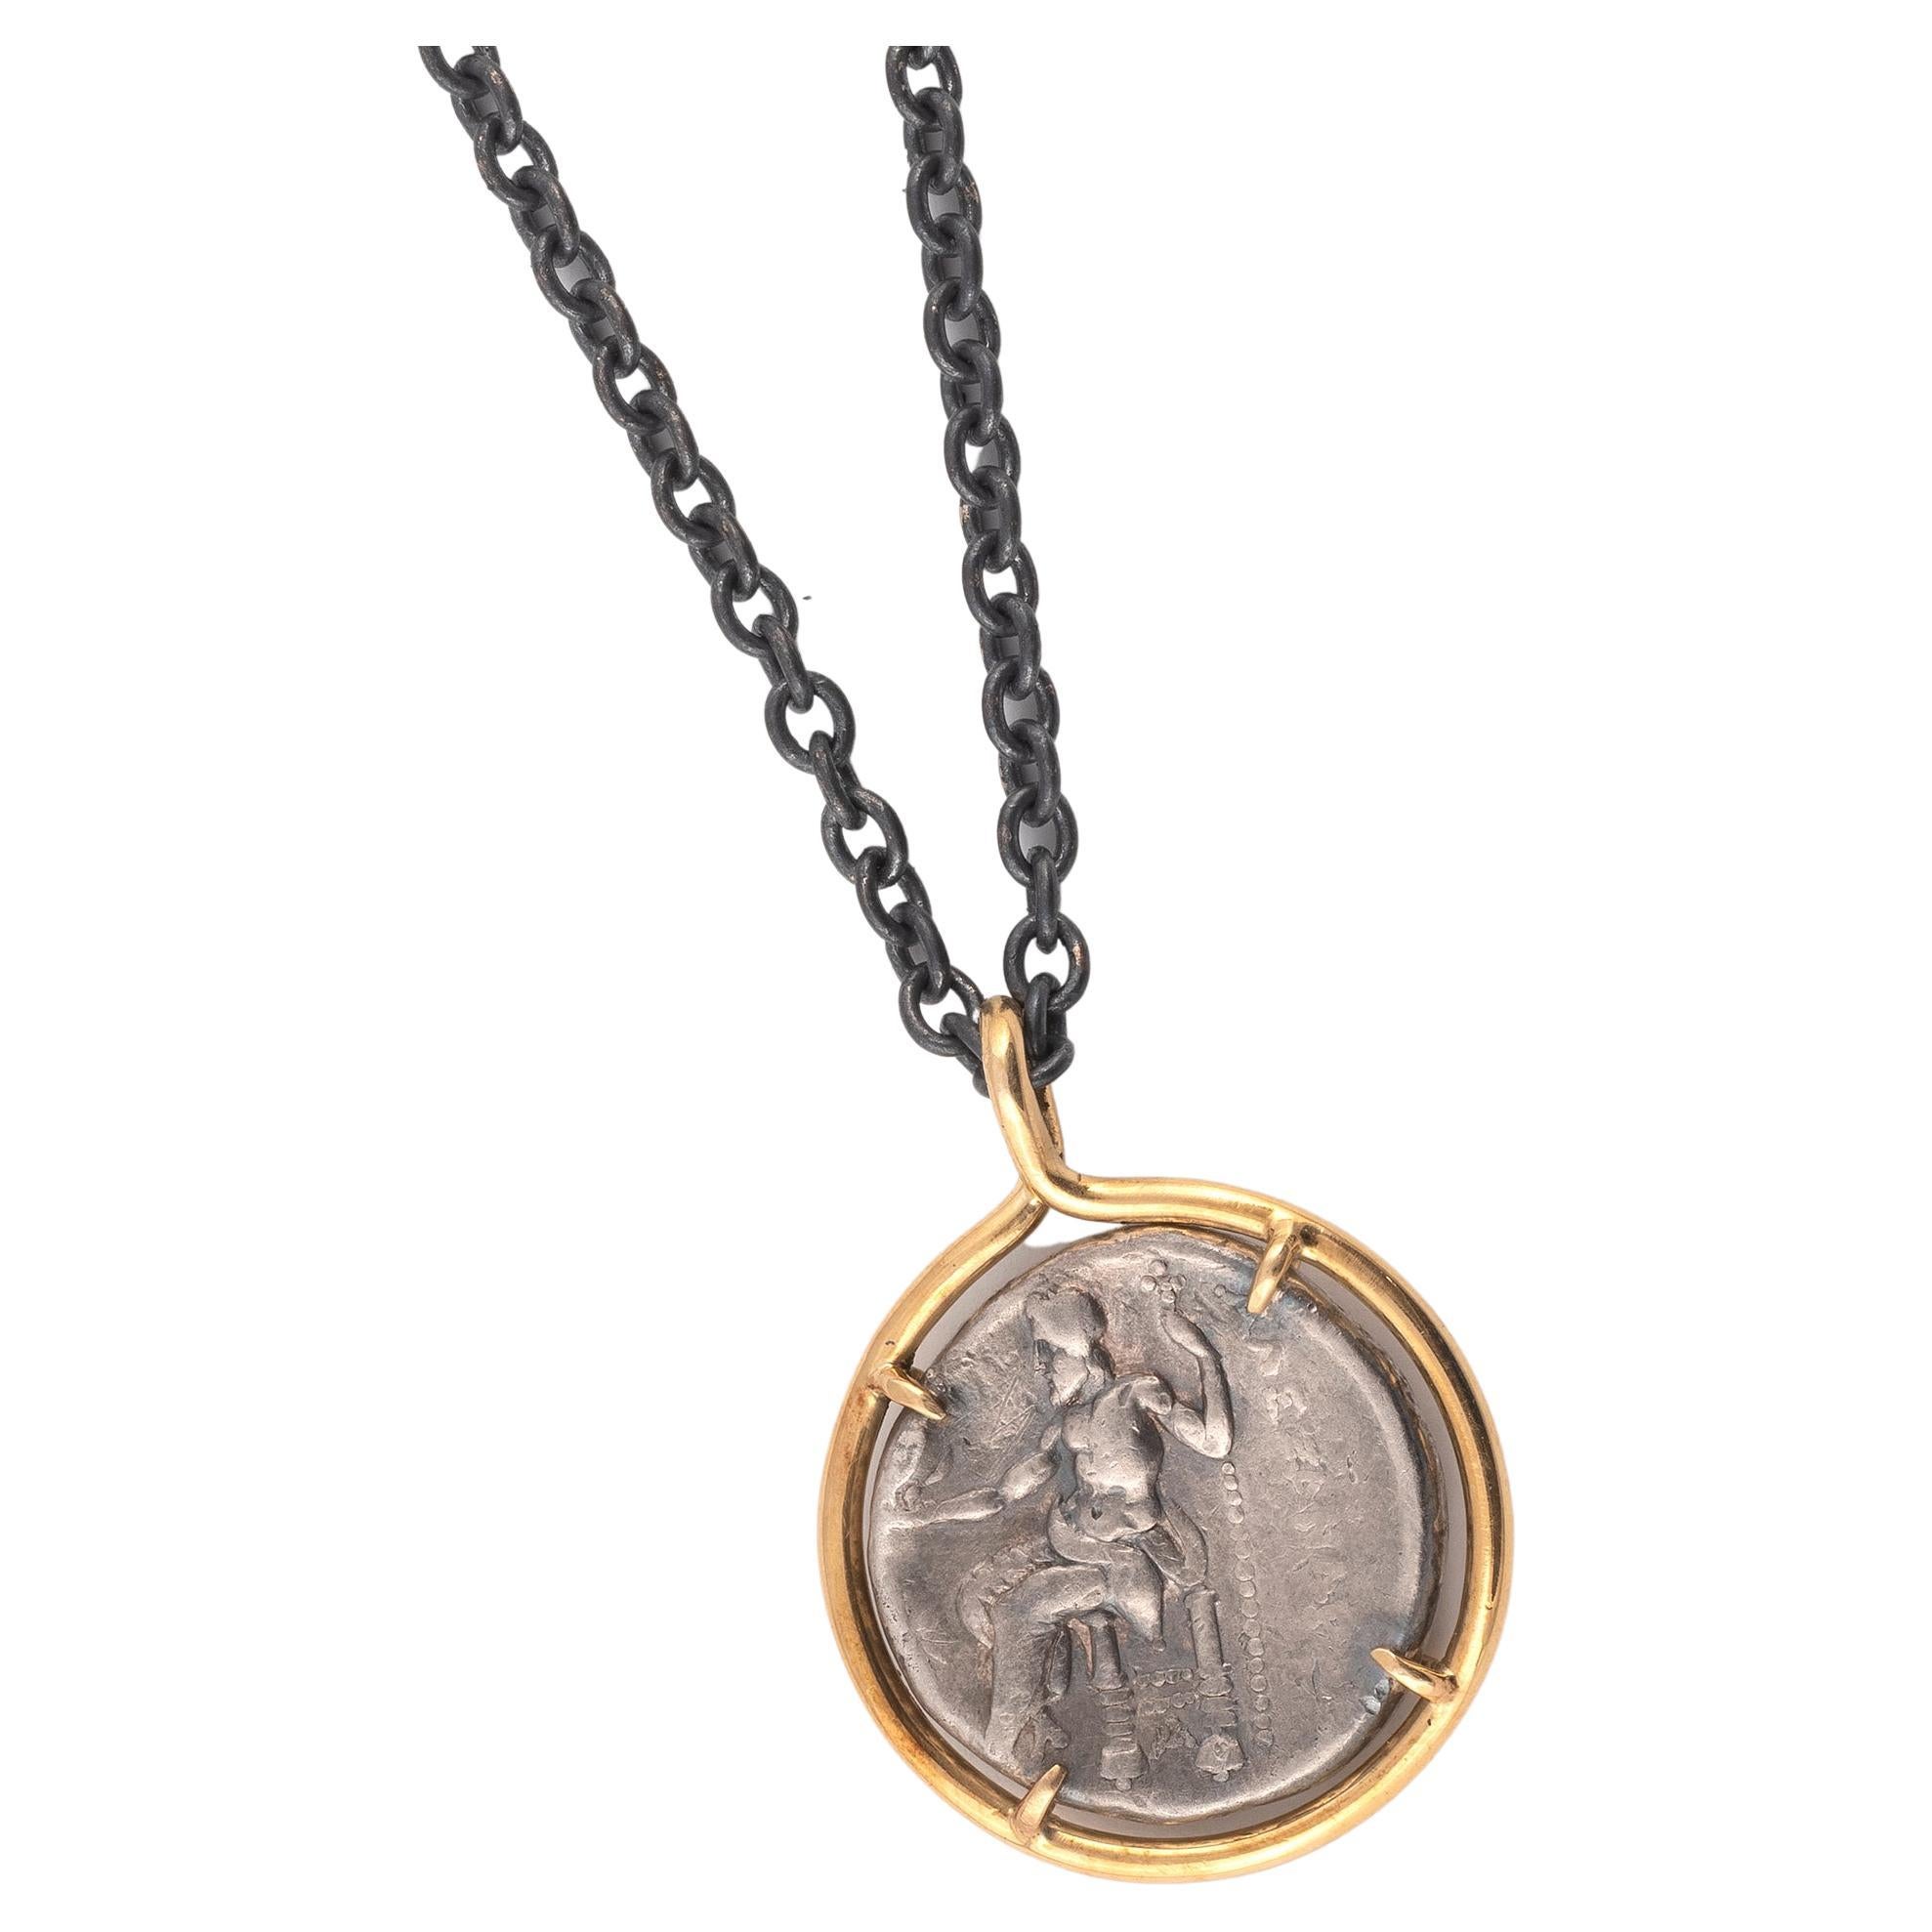 Greek Revival  A Silver Tetradrachm Of Alexander The Great Set In 18ct Gold Pendant 336-323 BC